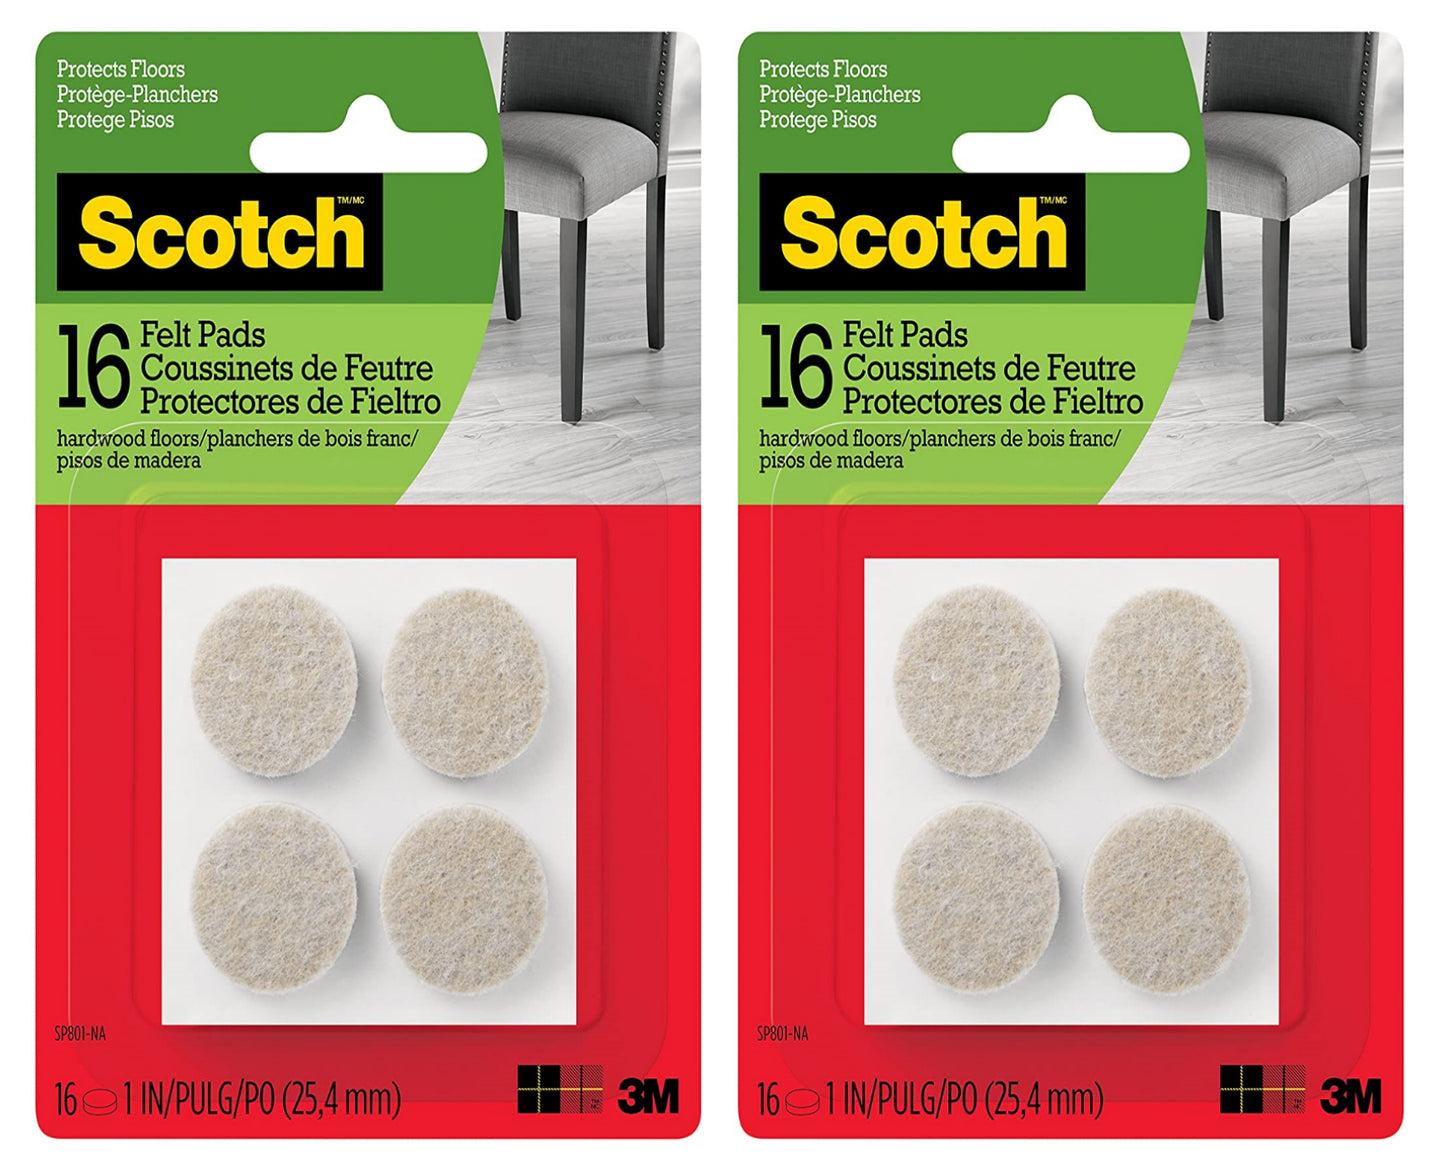 Scotch Felt Pads Round, 1 inch Diameter, 32 pcs Beige Fastening and Surface Protection Protects floors - 2 Pack